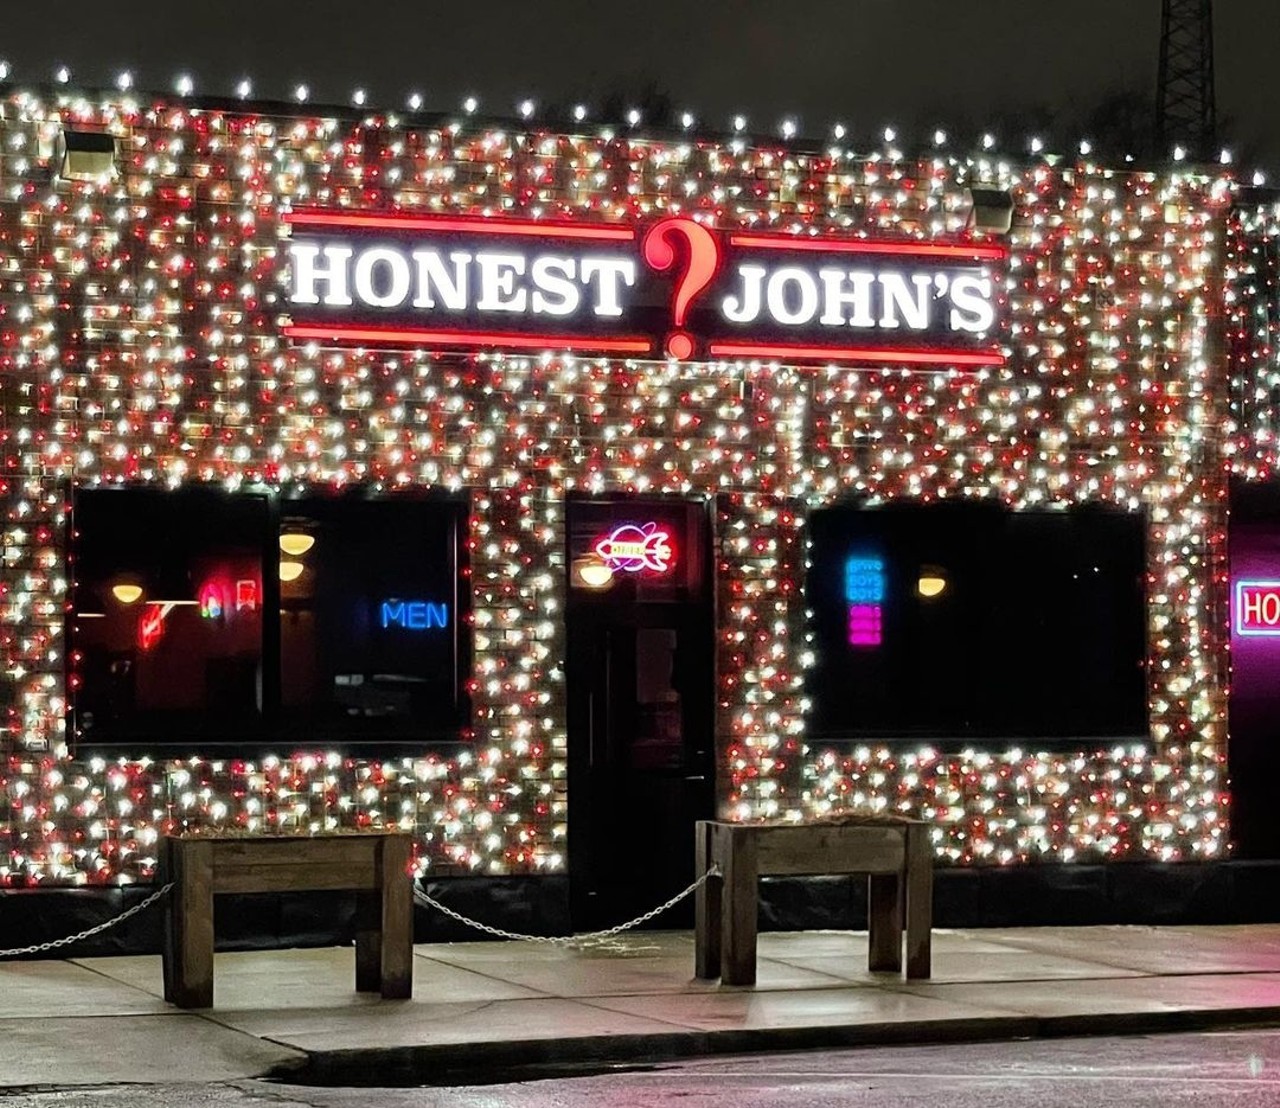 Honest John’s
488 Selden St., Detroit; 313-832-5646; honestjohnsdetroit.com
While this long-standing bar was sold to the Detroit Optimist Society Restaurant Group, known for its higher-end holdings, the new ownership thankfully kept things mostly the same — including its great burgers.